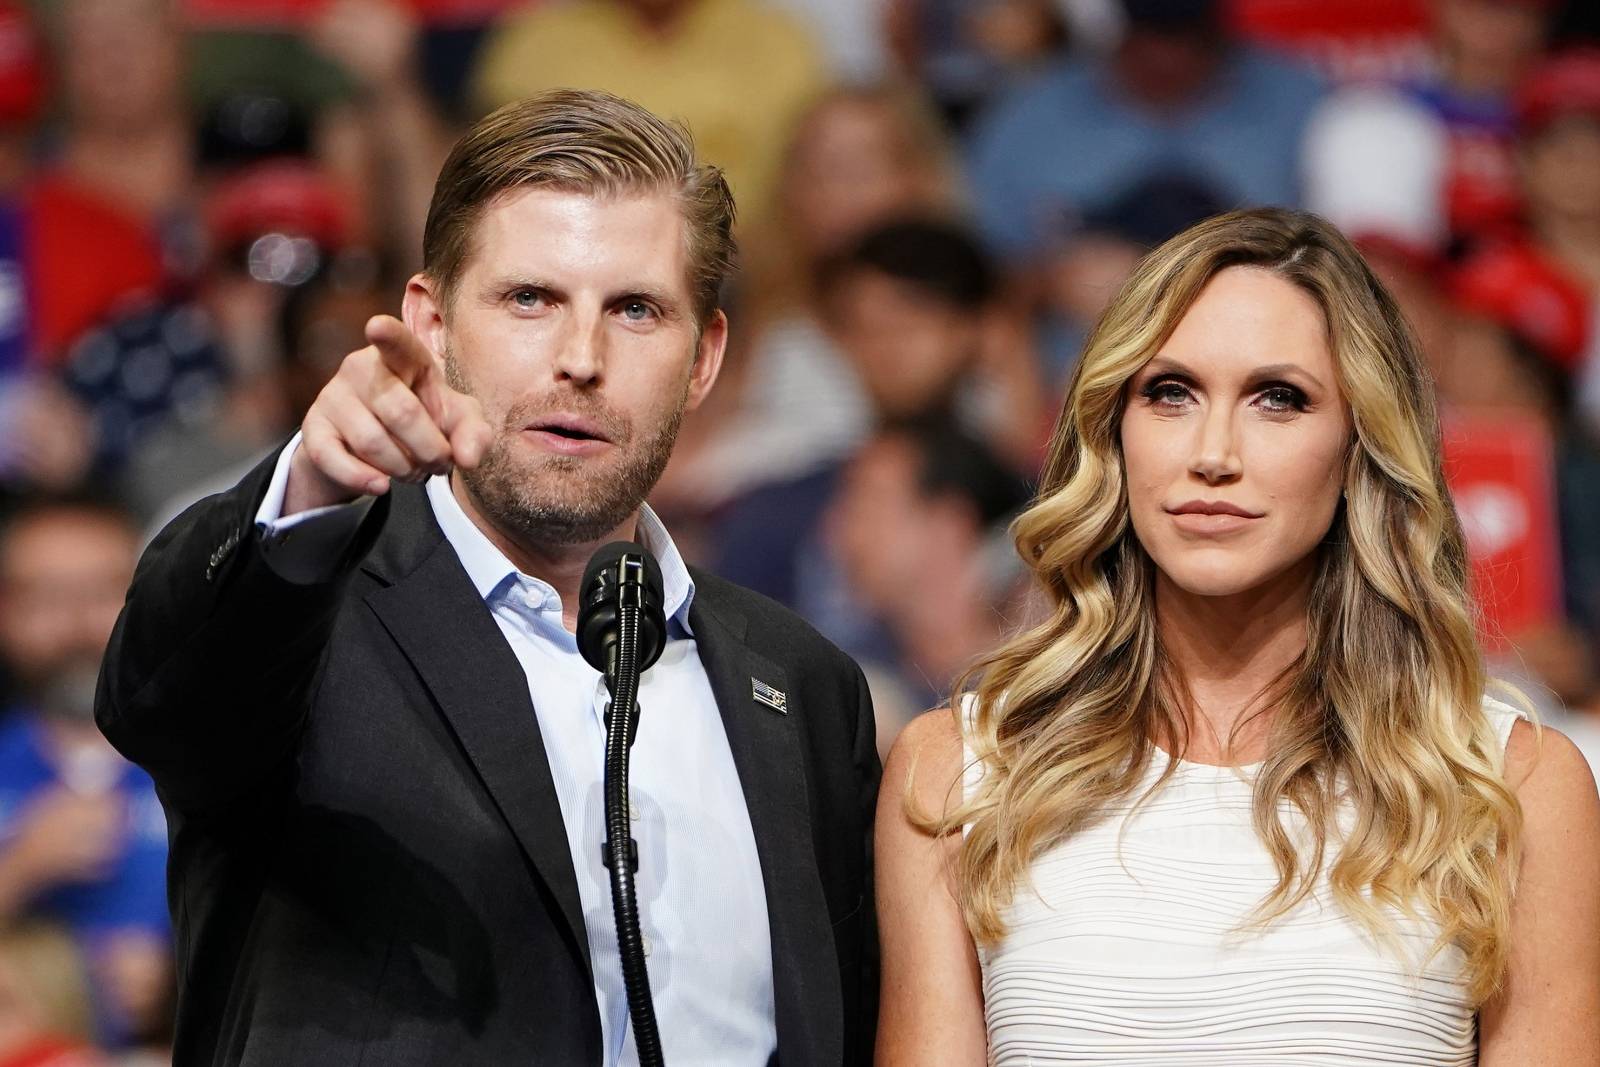 Eric Trump and Lara Trump speak before a U.S. President Donald Trump campaign kick off rally at the Amway Center in Orlando